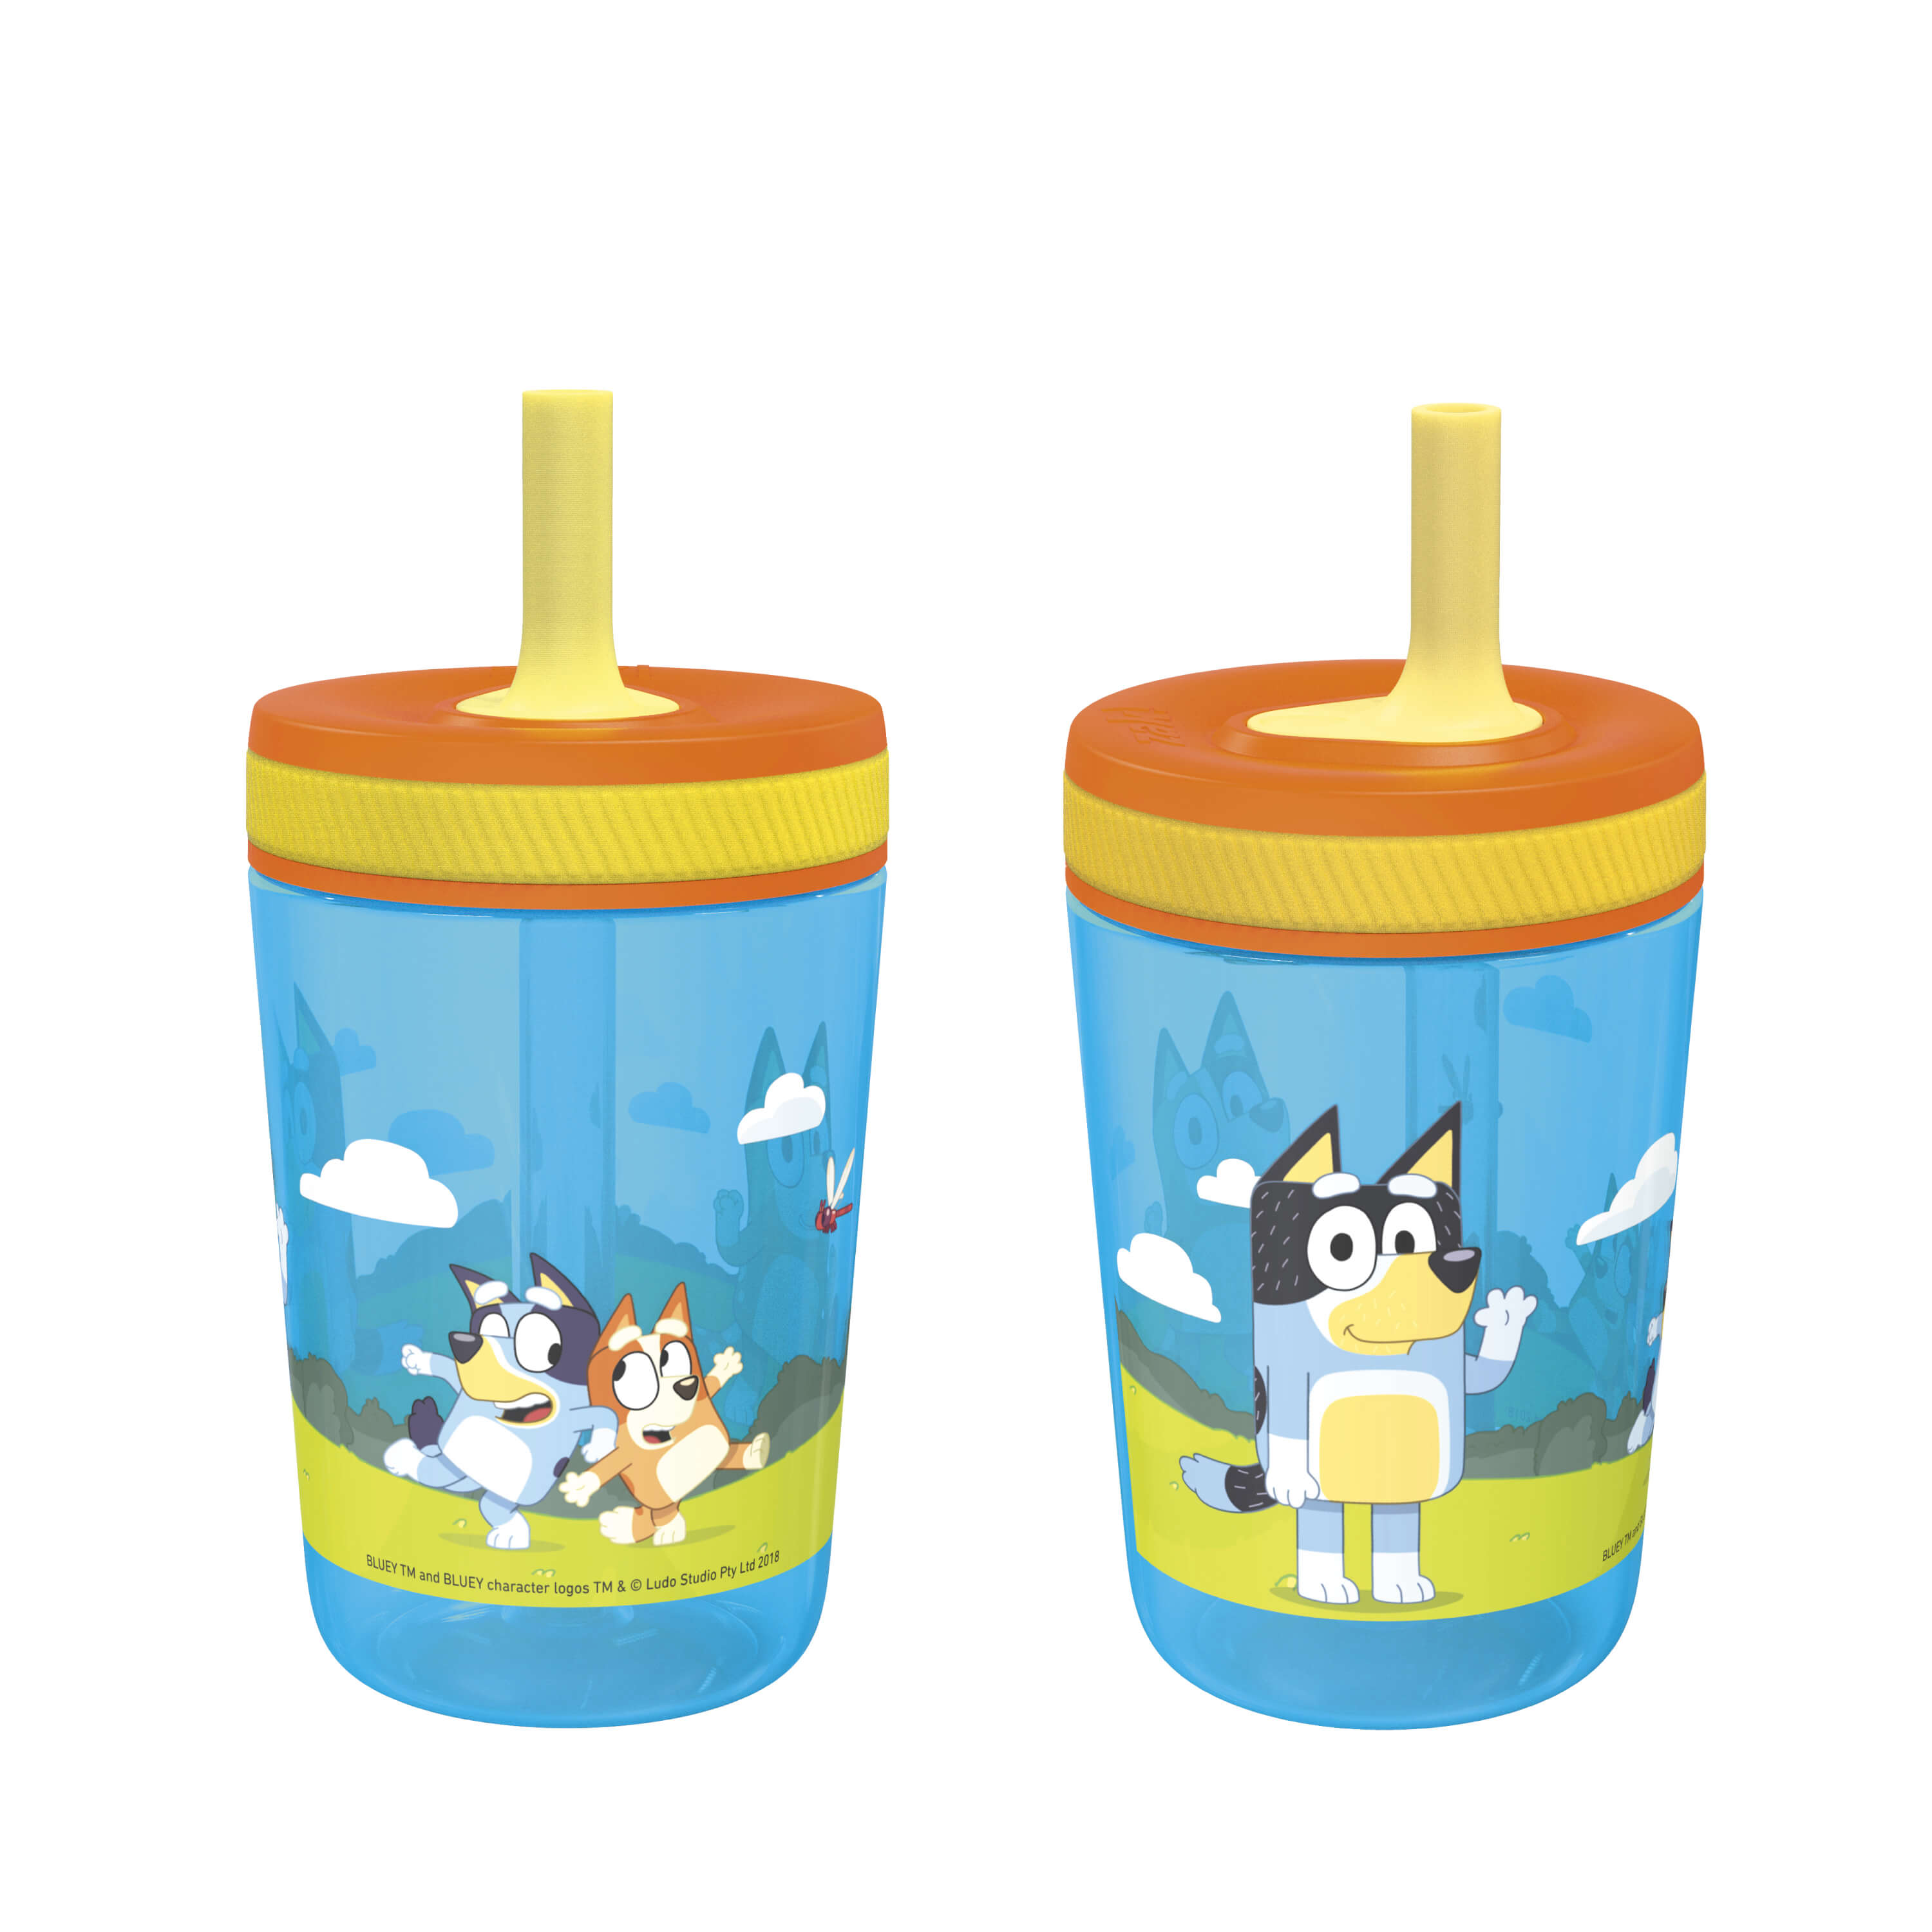 Zak Designs 15oz Recycled Plastic Kids' Straw tumbler with Antimicrobial  Spout - Bugs